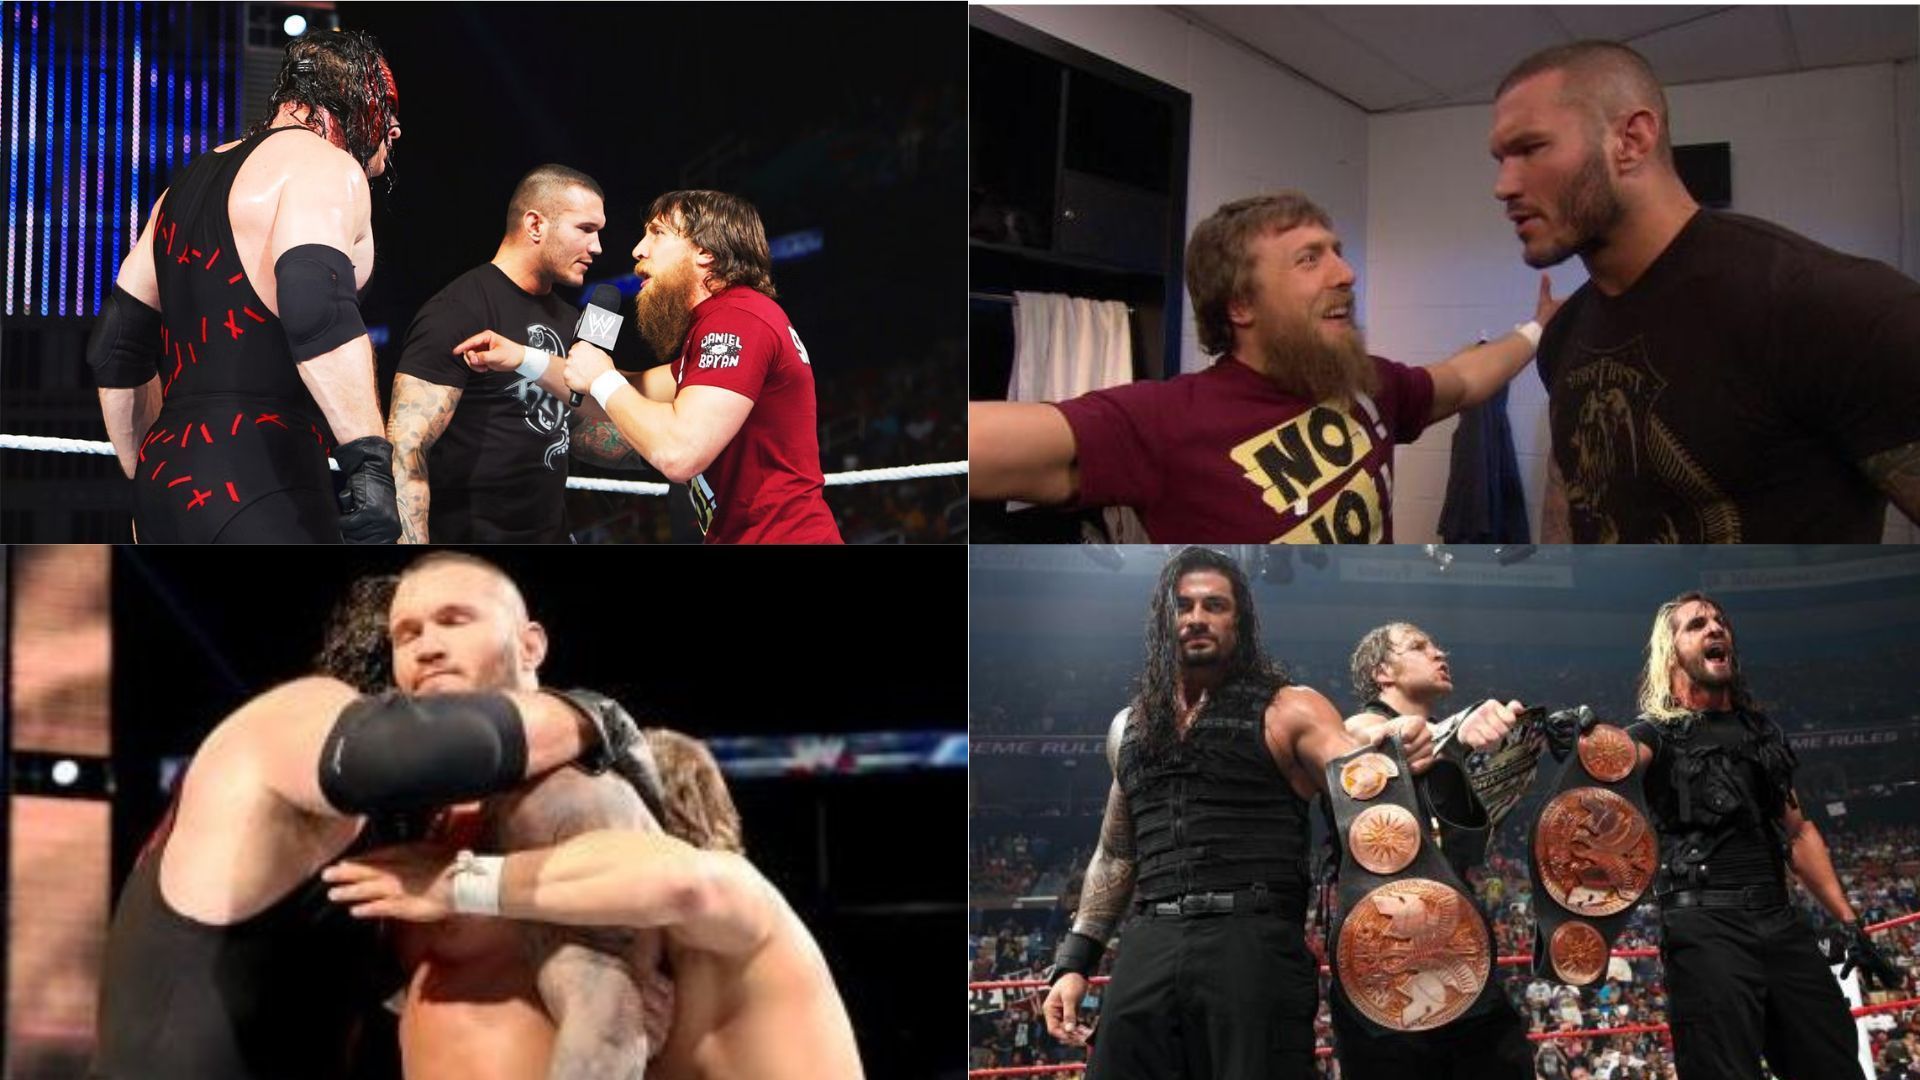 Randy Orton and Team Hell No defeated The Shield by submission in 2013